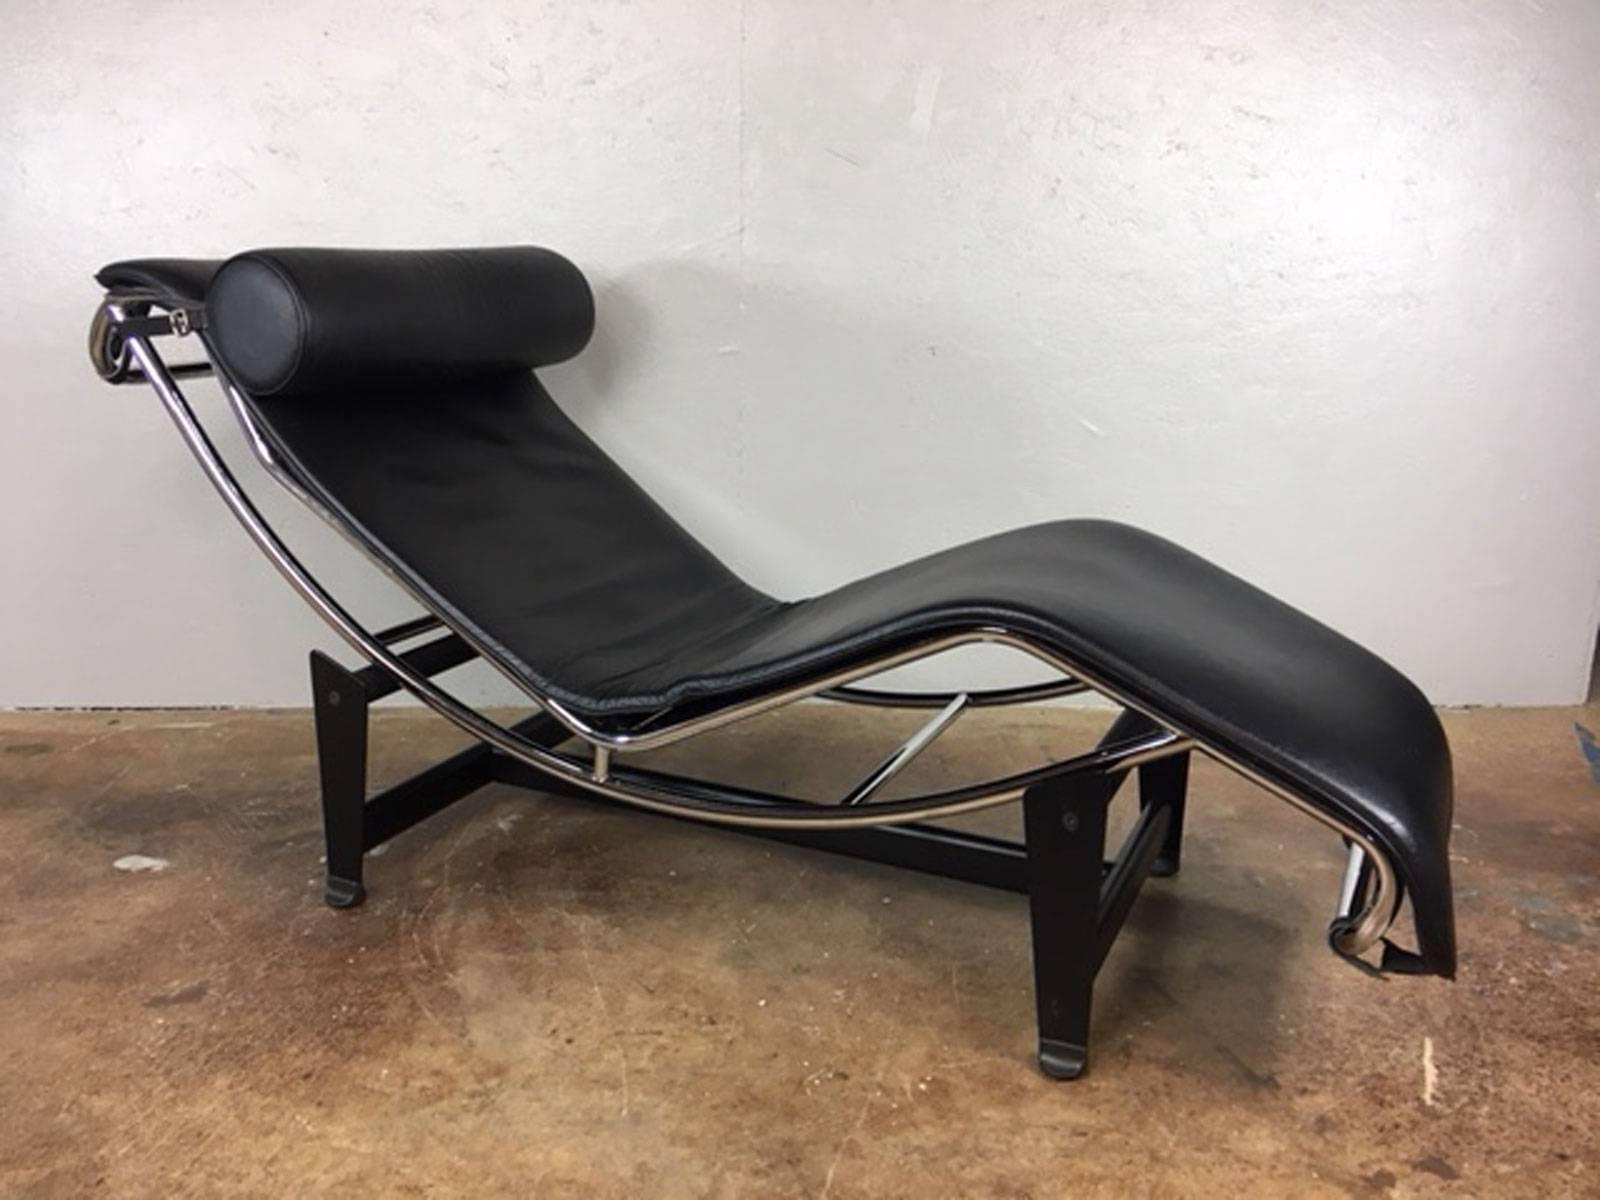 Very well made Le Corbusier LC4 style lounge chair in black leather. All bands in excellent condition. Leather in very good condition. No rips, tears, holes, or unusual wear. Nice piece. Simply unknown maker. Believed to be circa 1970s.